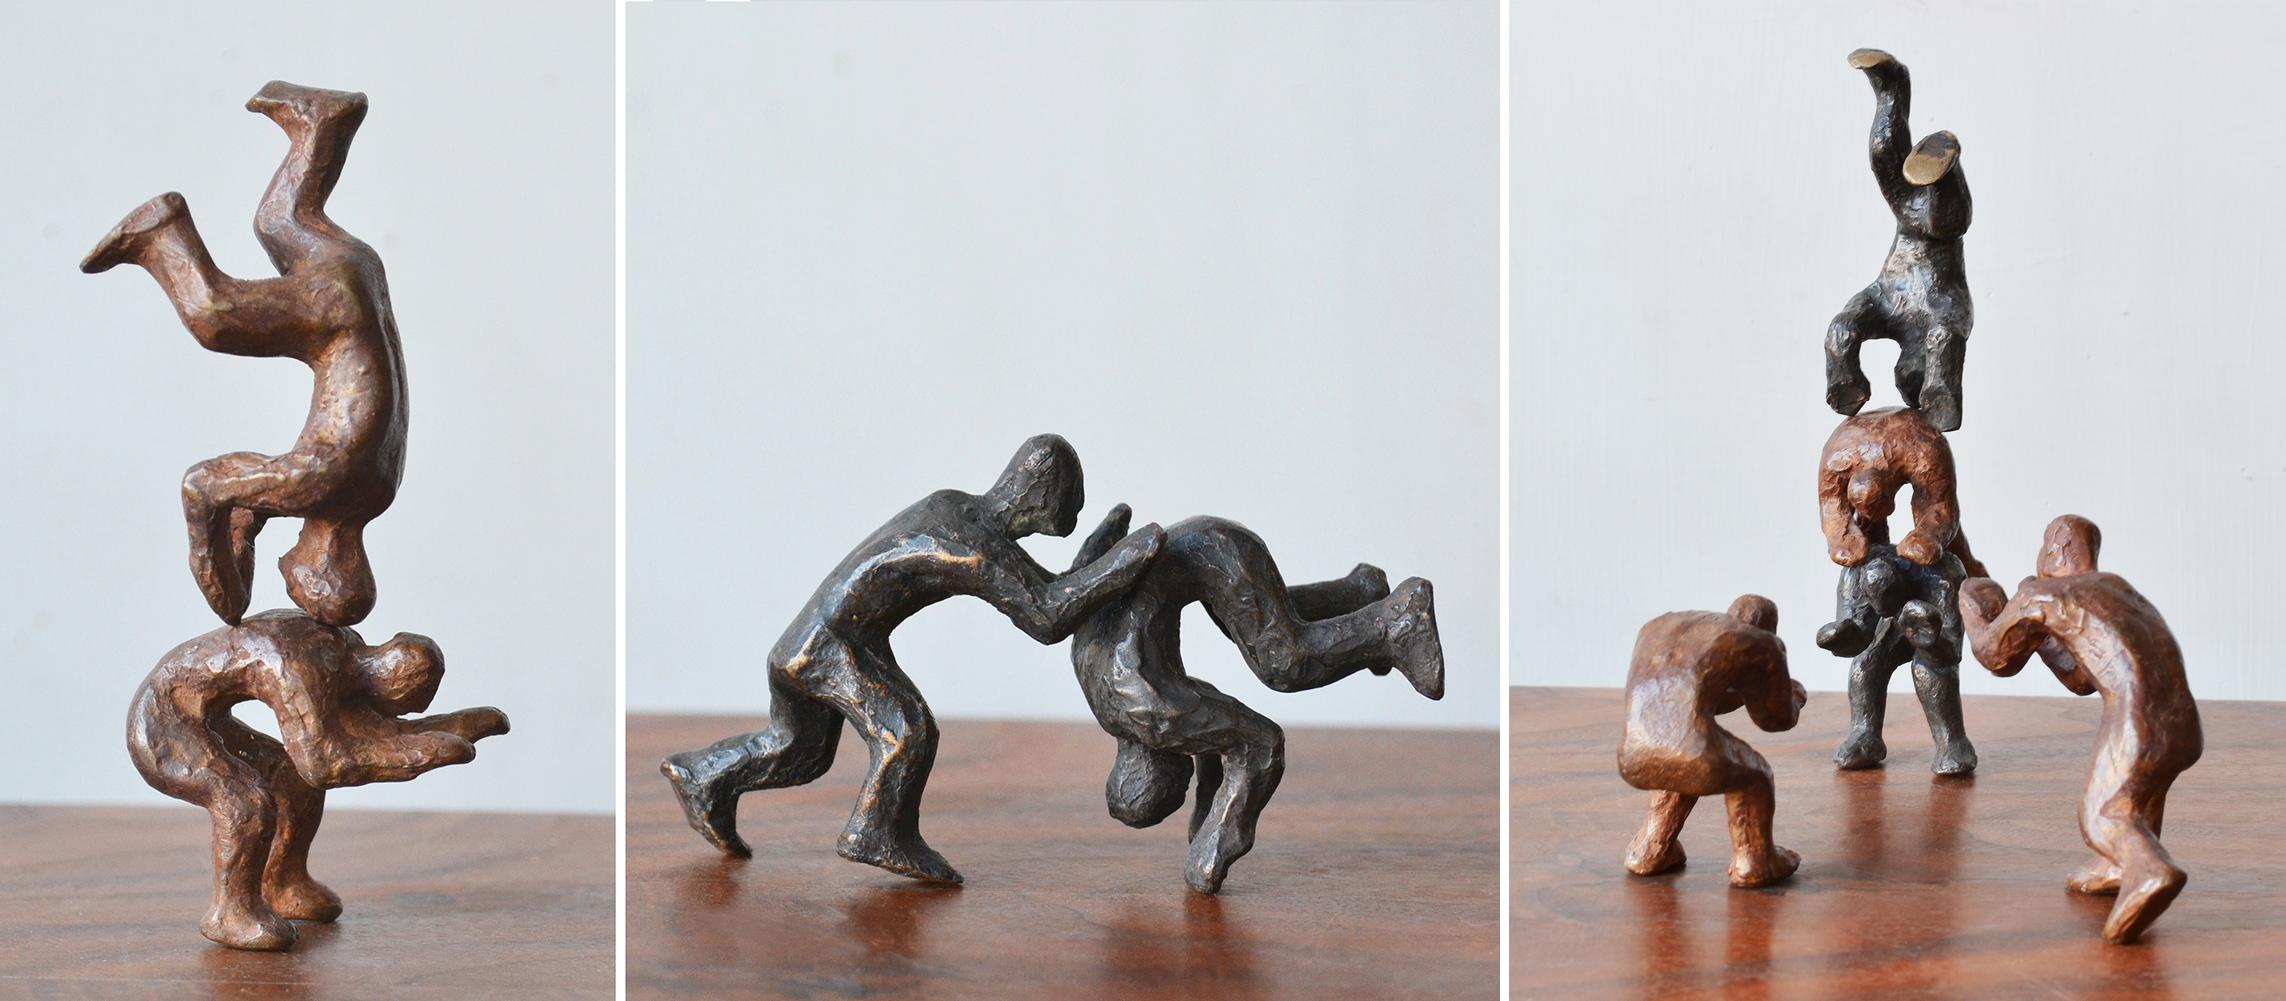 Why Fight When You Can Play? 3 Pairs interactive miniature bronze figures  - Contemporary Sculpture by Noa Bornstein